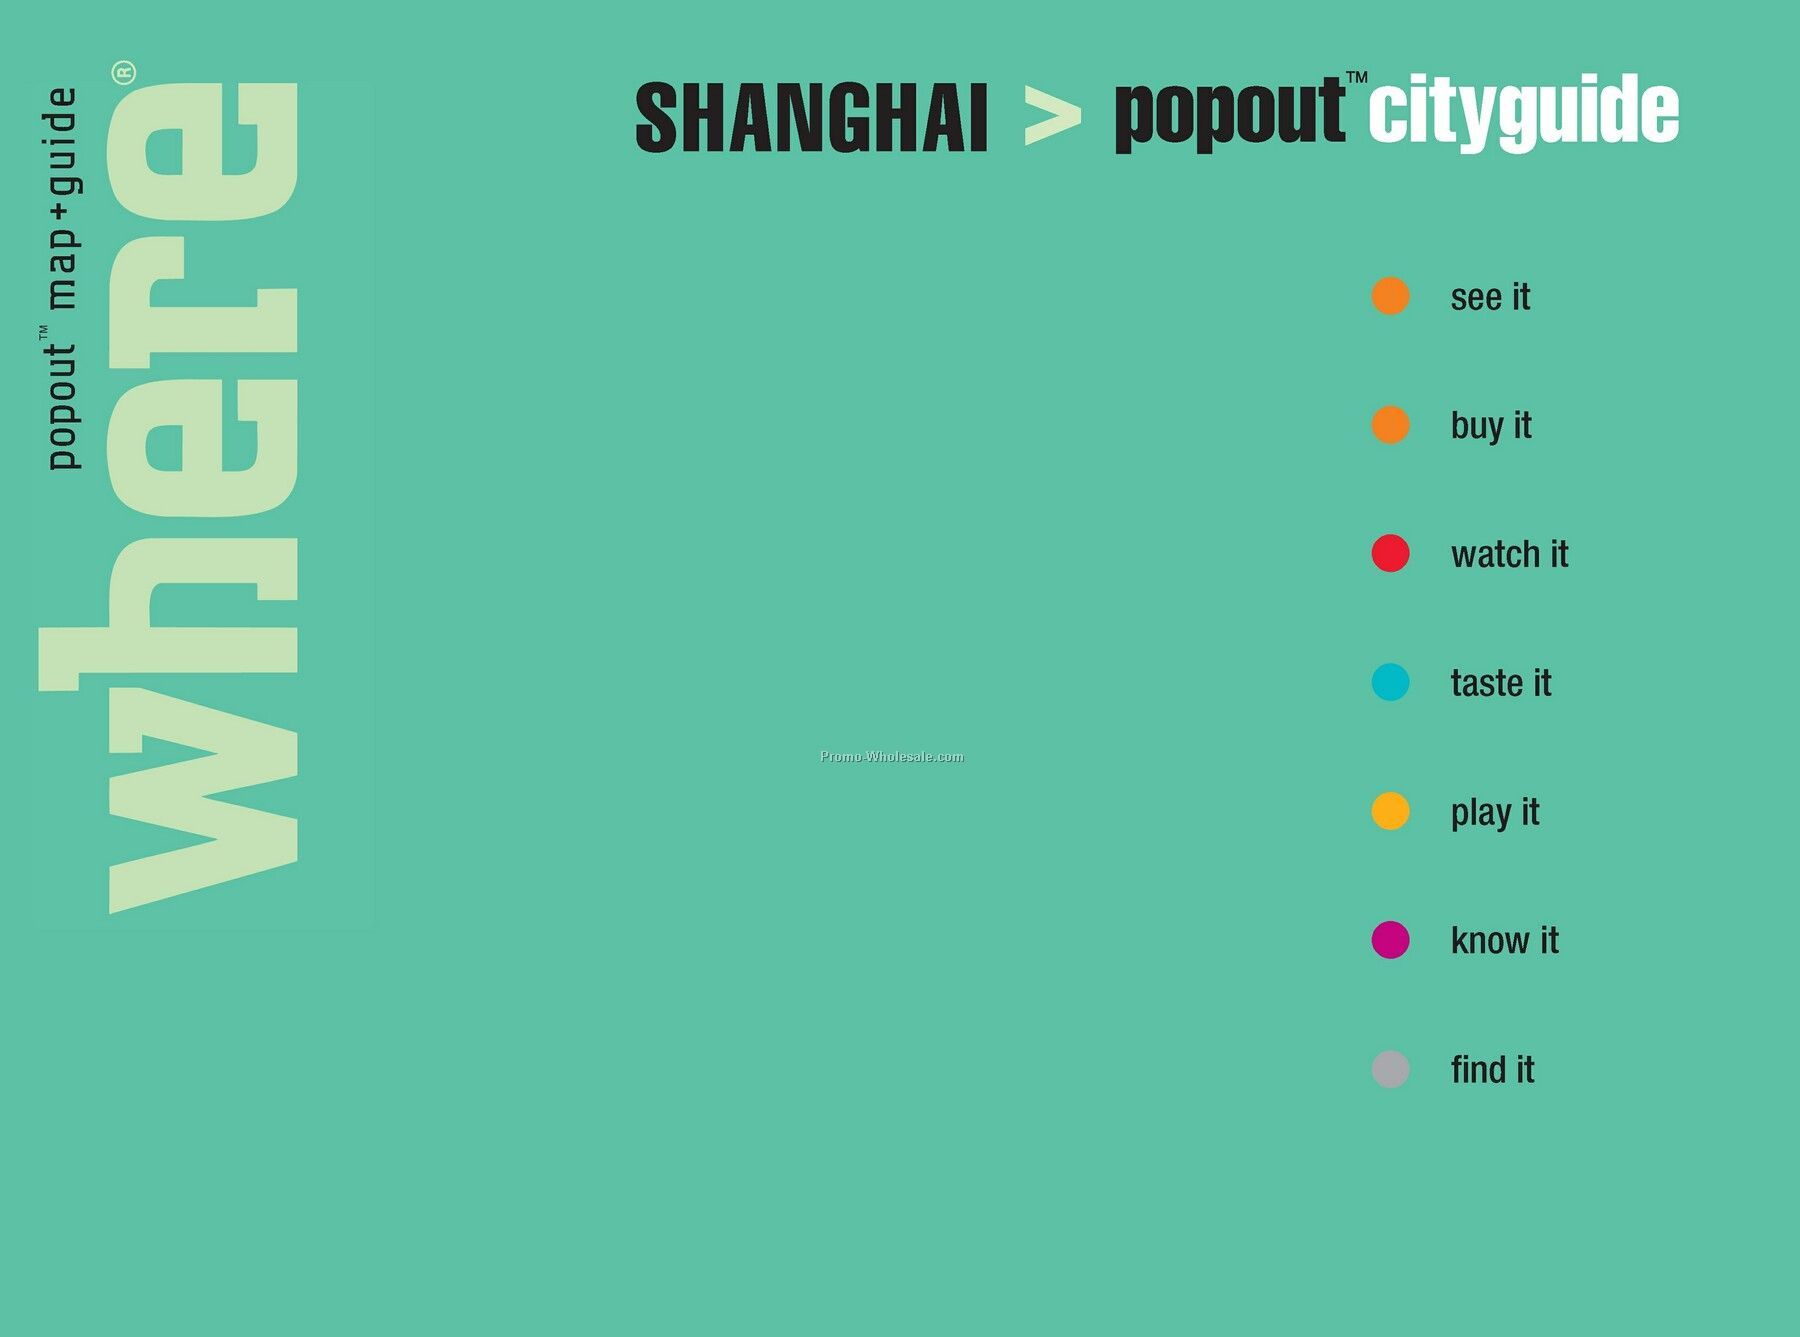 Travel Guides - International Guide Of Shanghai - Featuring Popout Maps